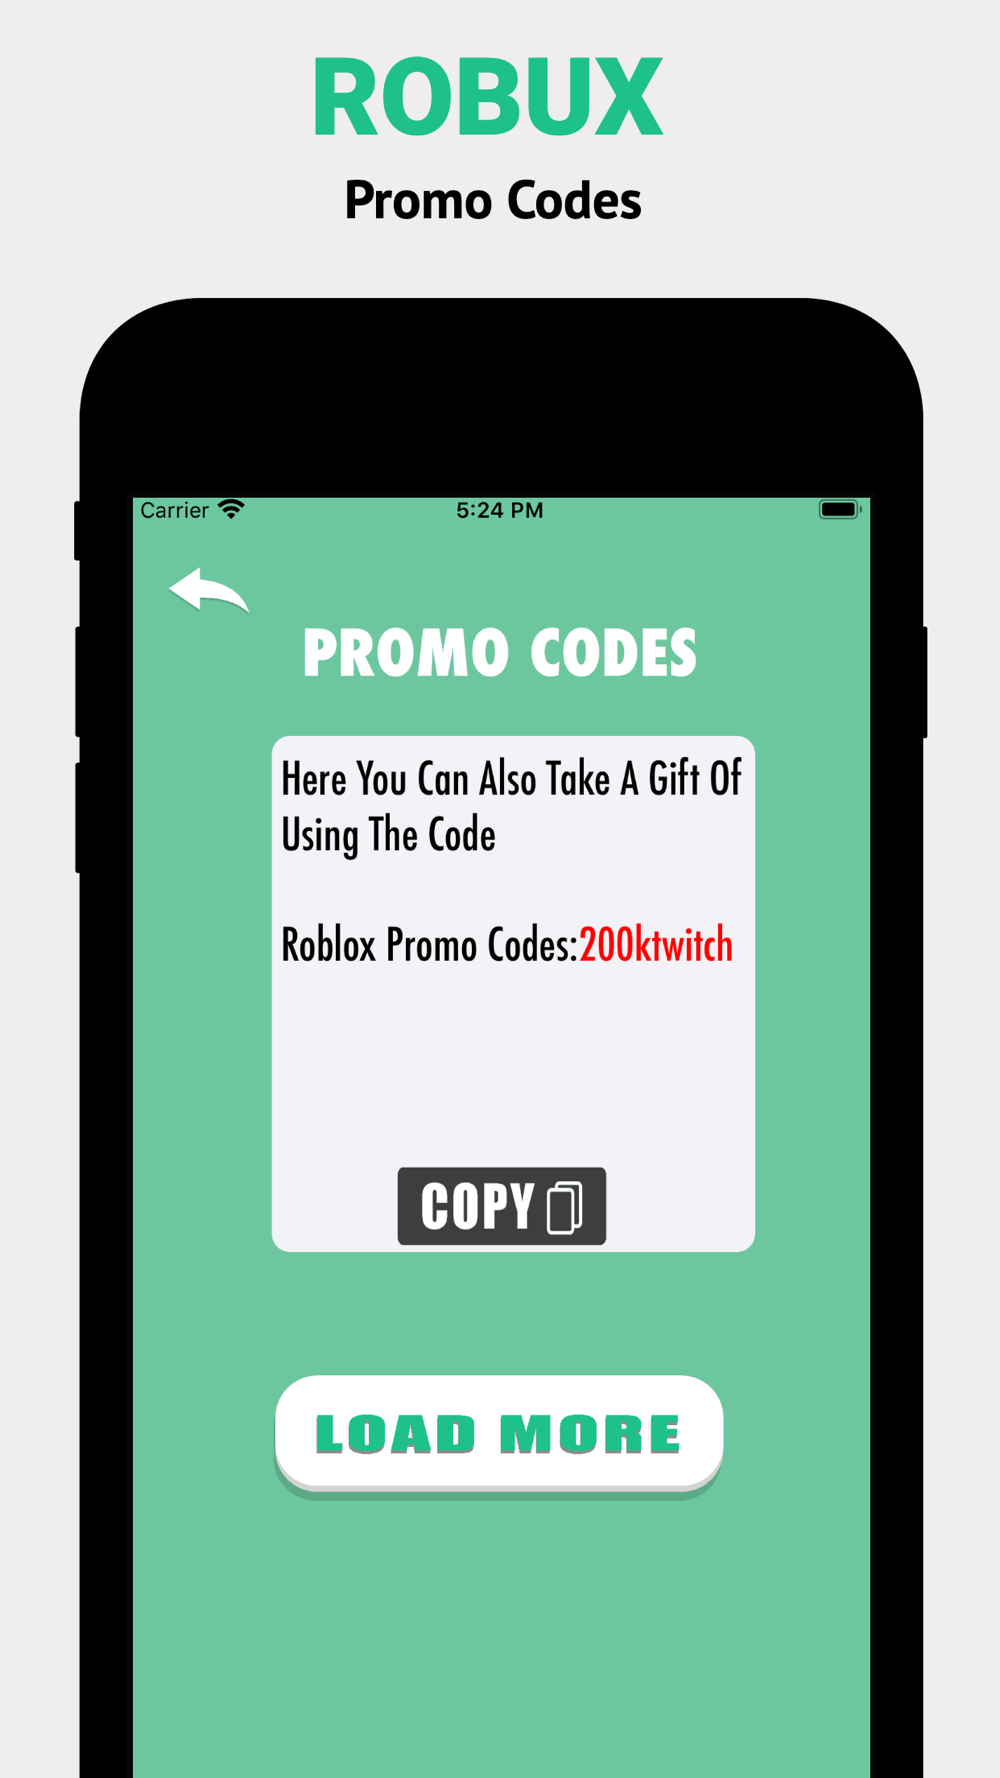 Robux Promo Codes For Roblox Free Download App For Iphone Steprimo Com - free robux codes on iphone